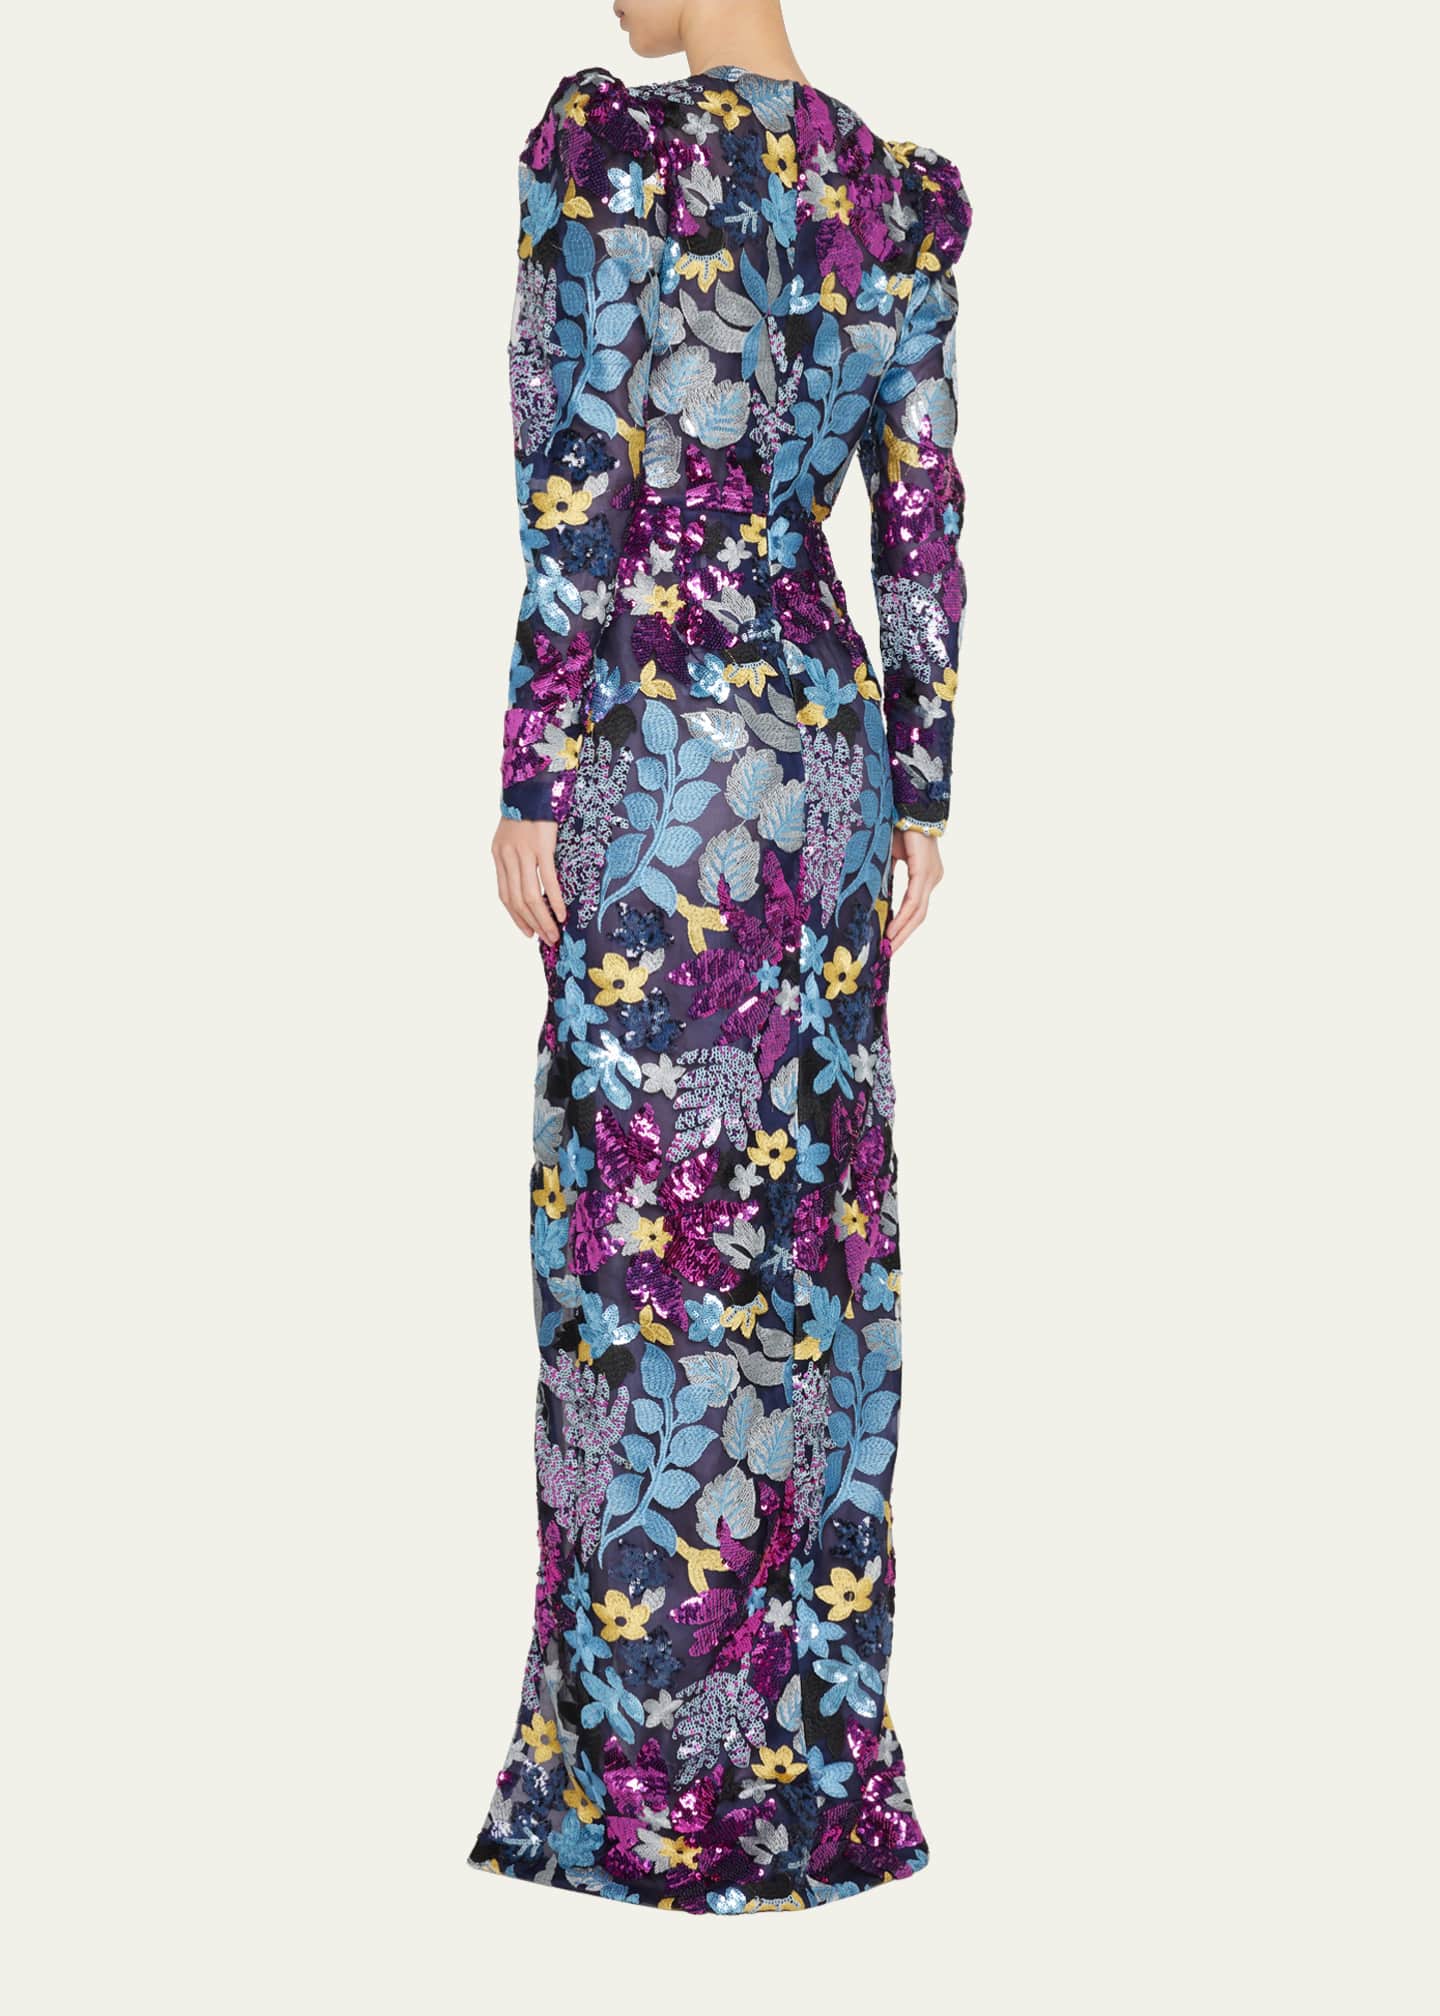 J. Mendel Floral-Embroidered Sequined Column Gown - Bergdorf Goodman